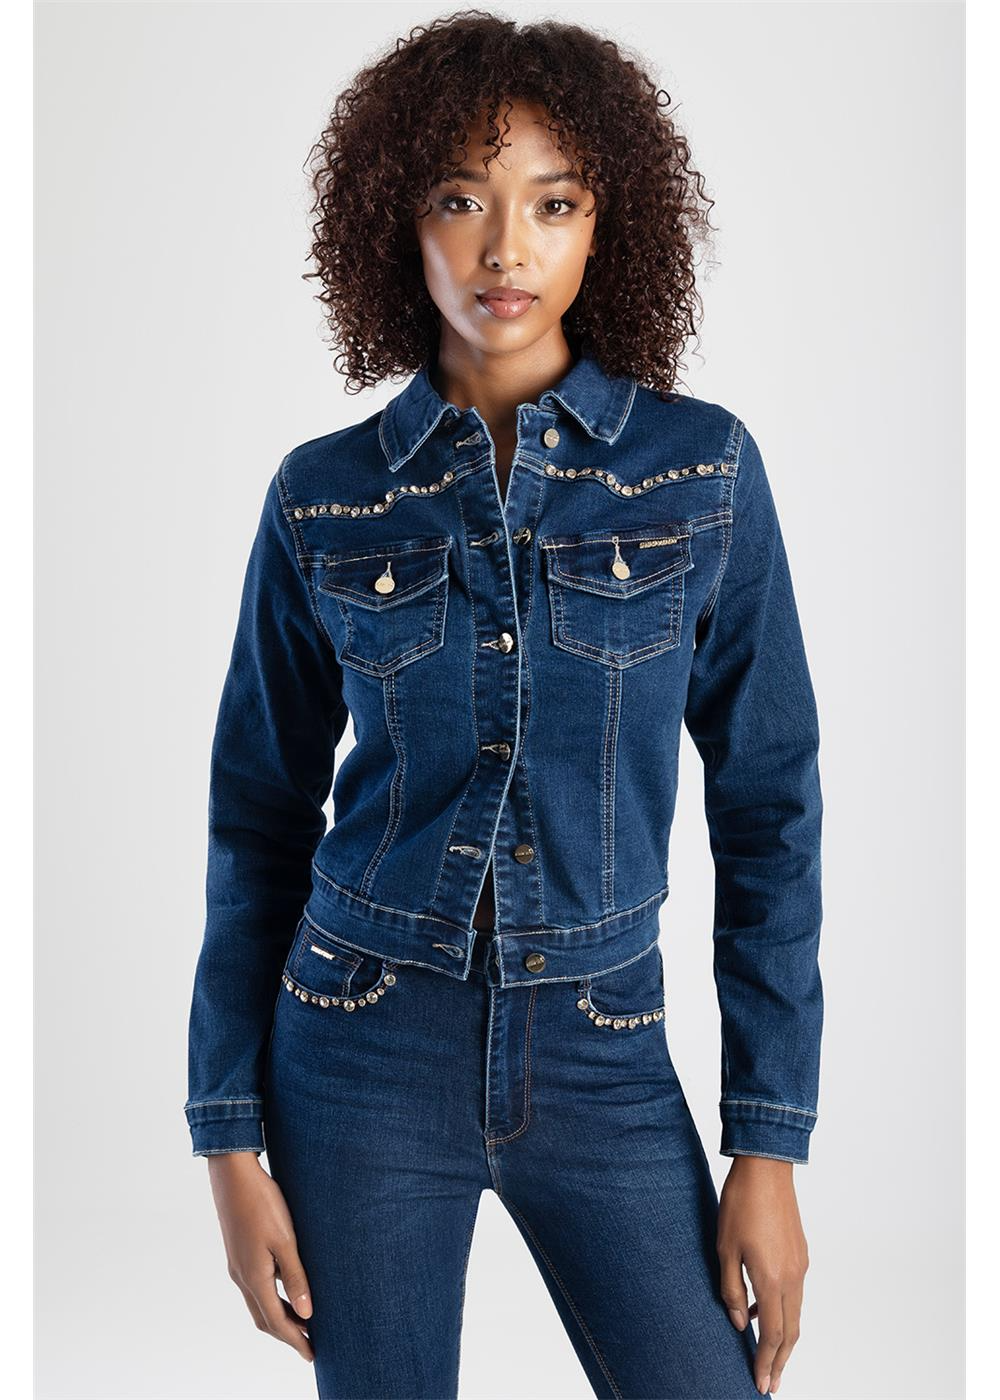 Sissyboy Js30761 Denim Jacket With Wing Embroidery